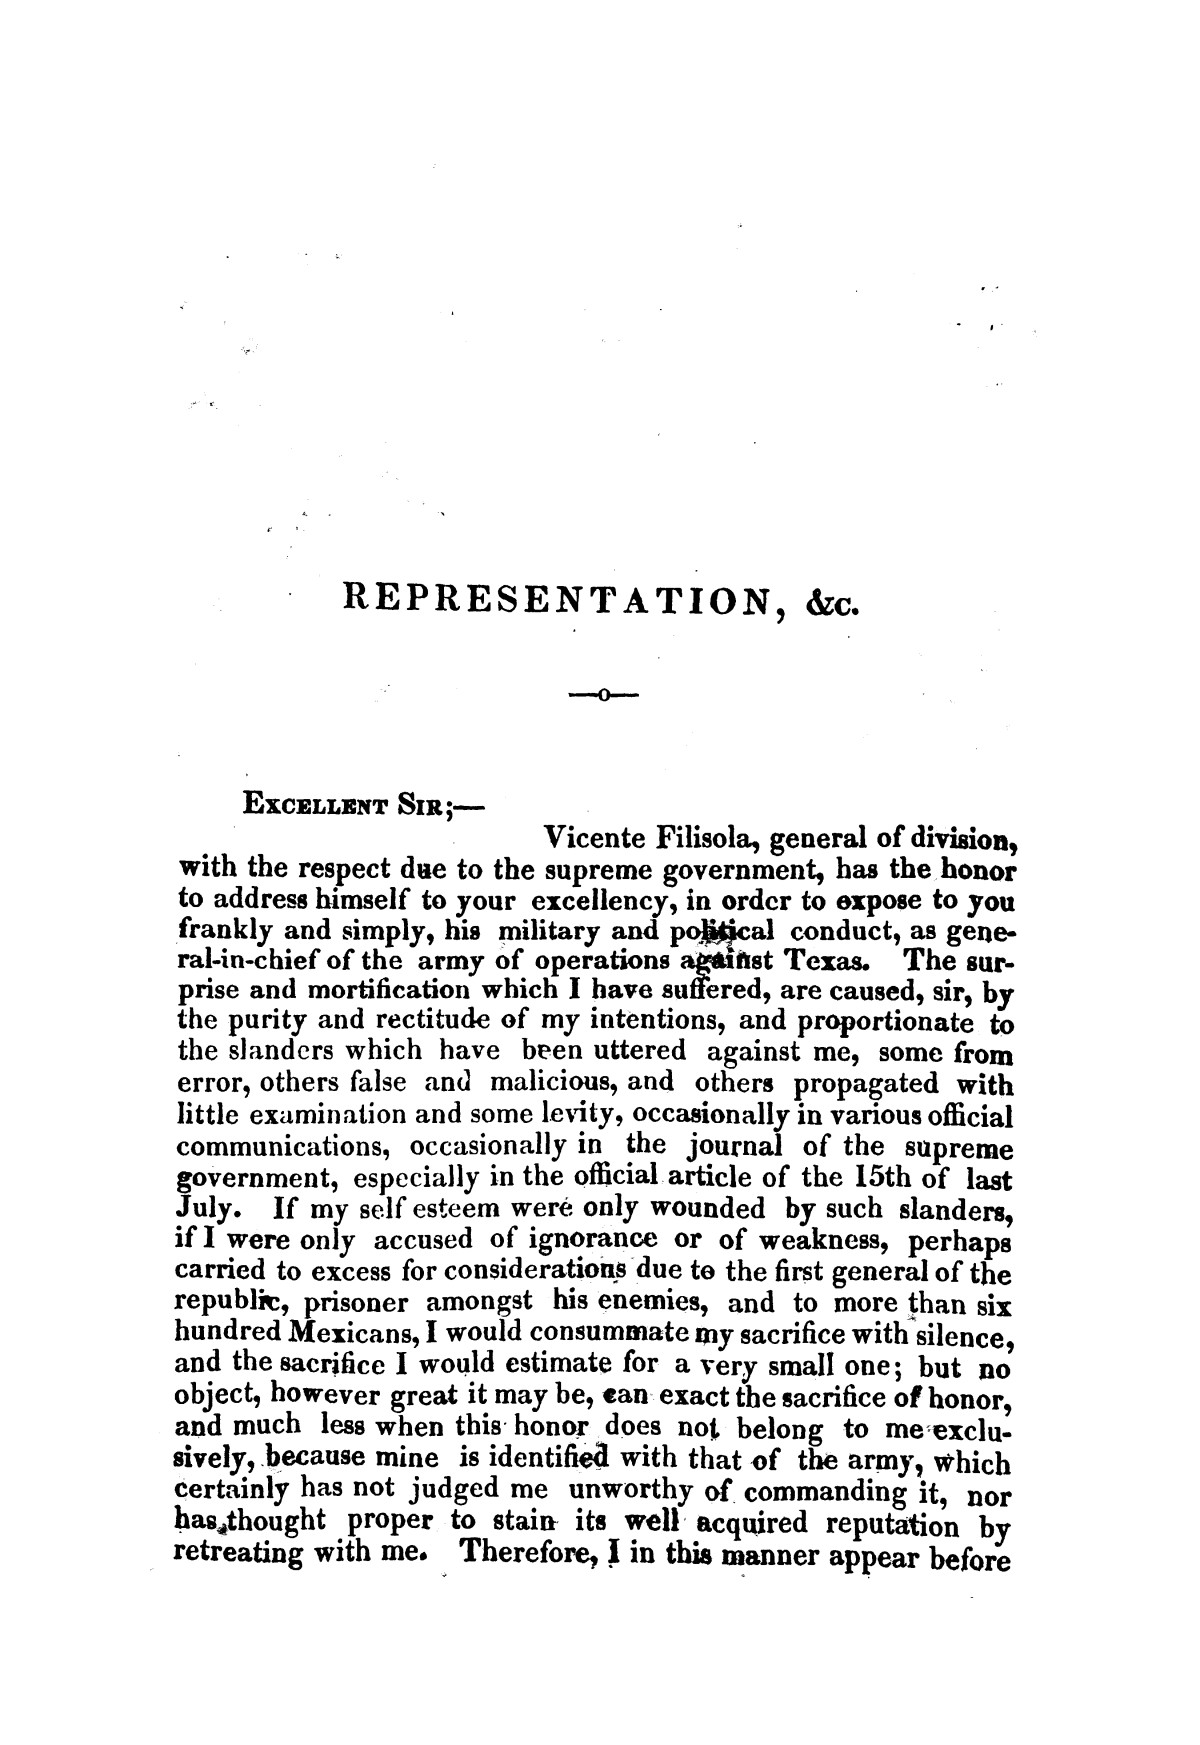 Evacuation of Texas : translation of the Representation addressed to the supreme government / by Vicente Filisola, in defence of his honor, and explanation of his operations as commander-in-chief of the army against Texas.
                                                
                                                    [Sequence #]: 6 of 72
                                                